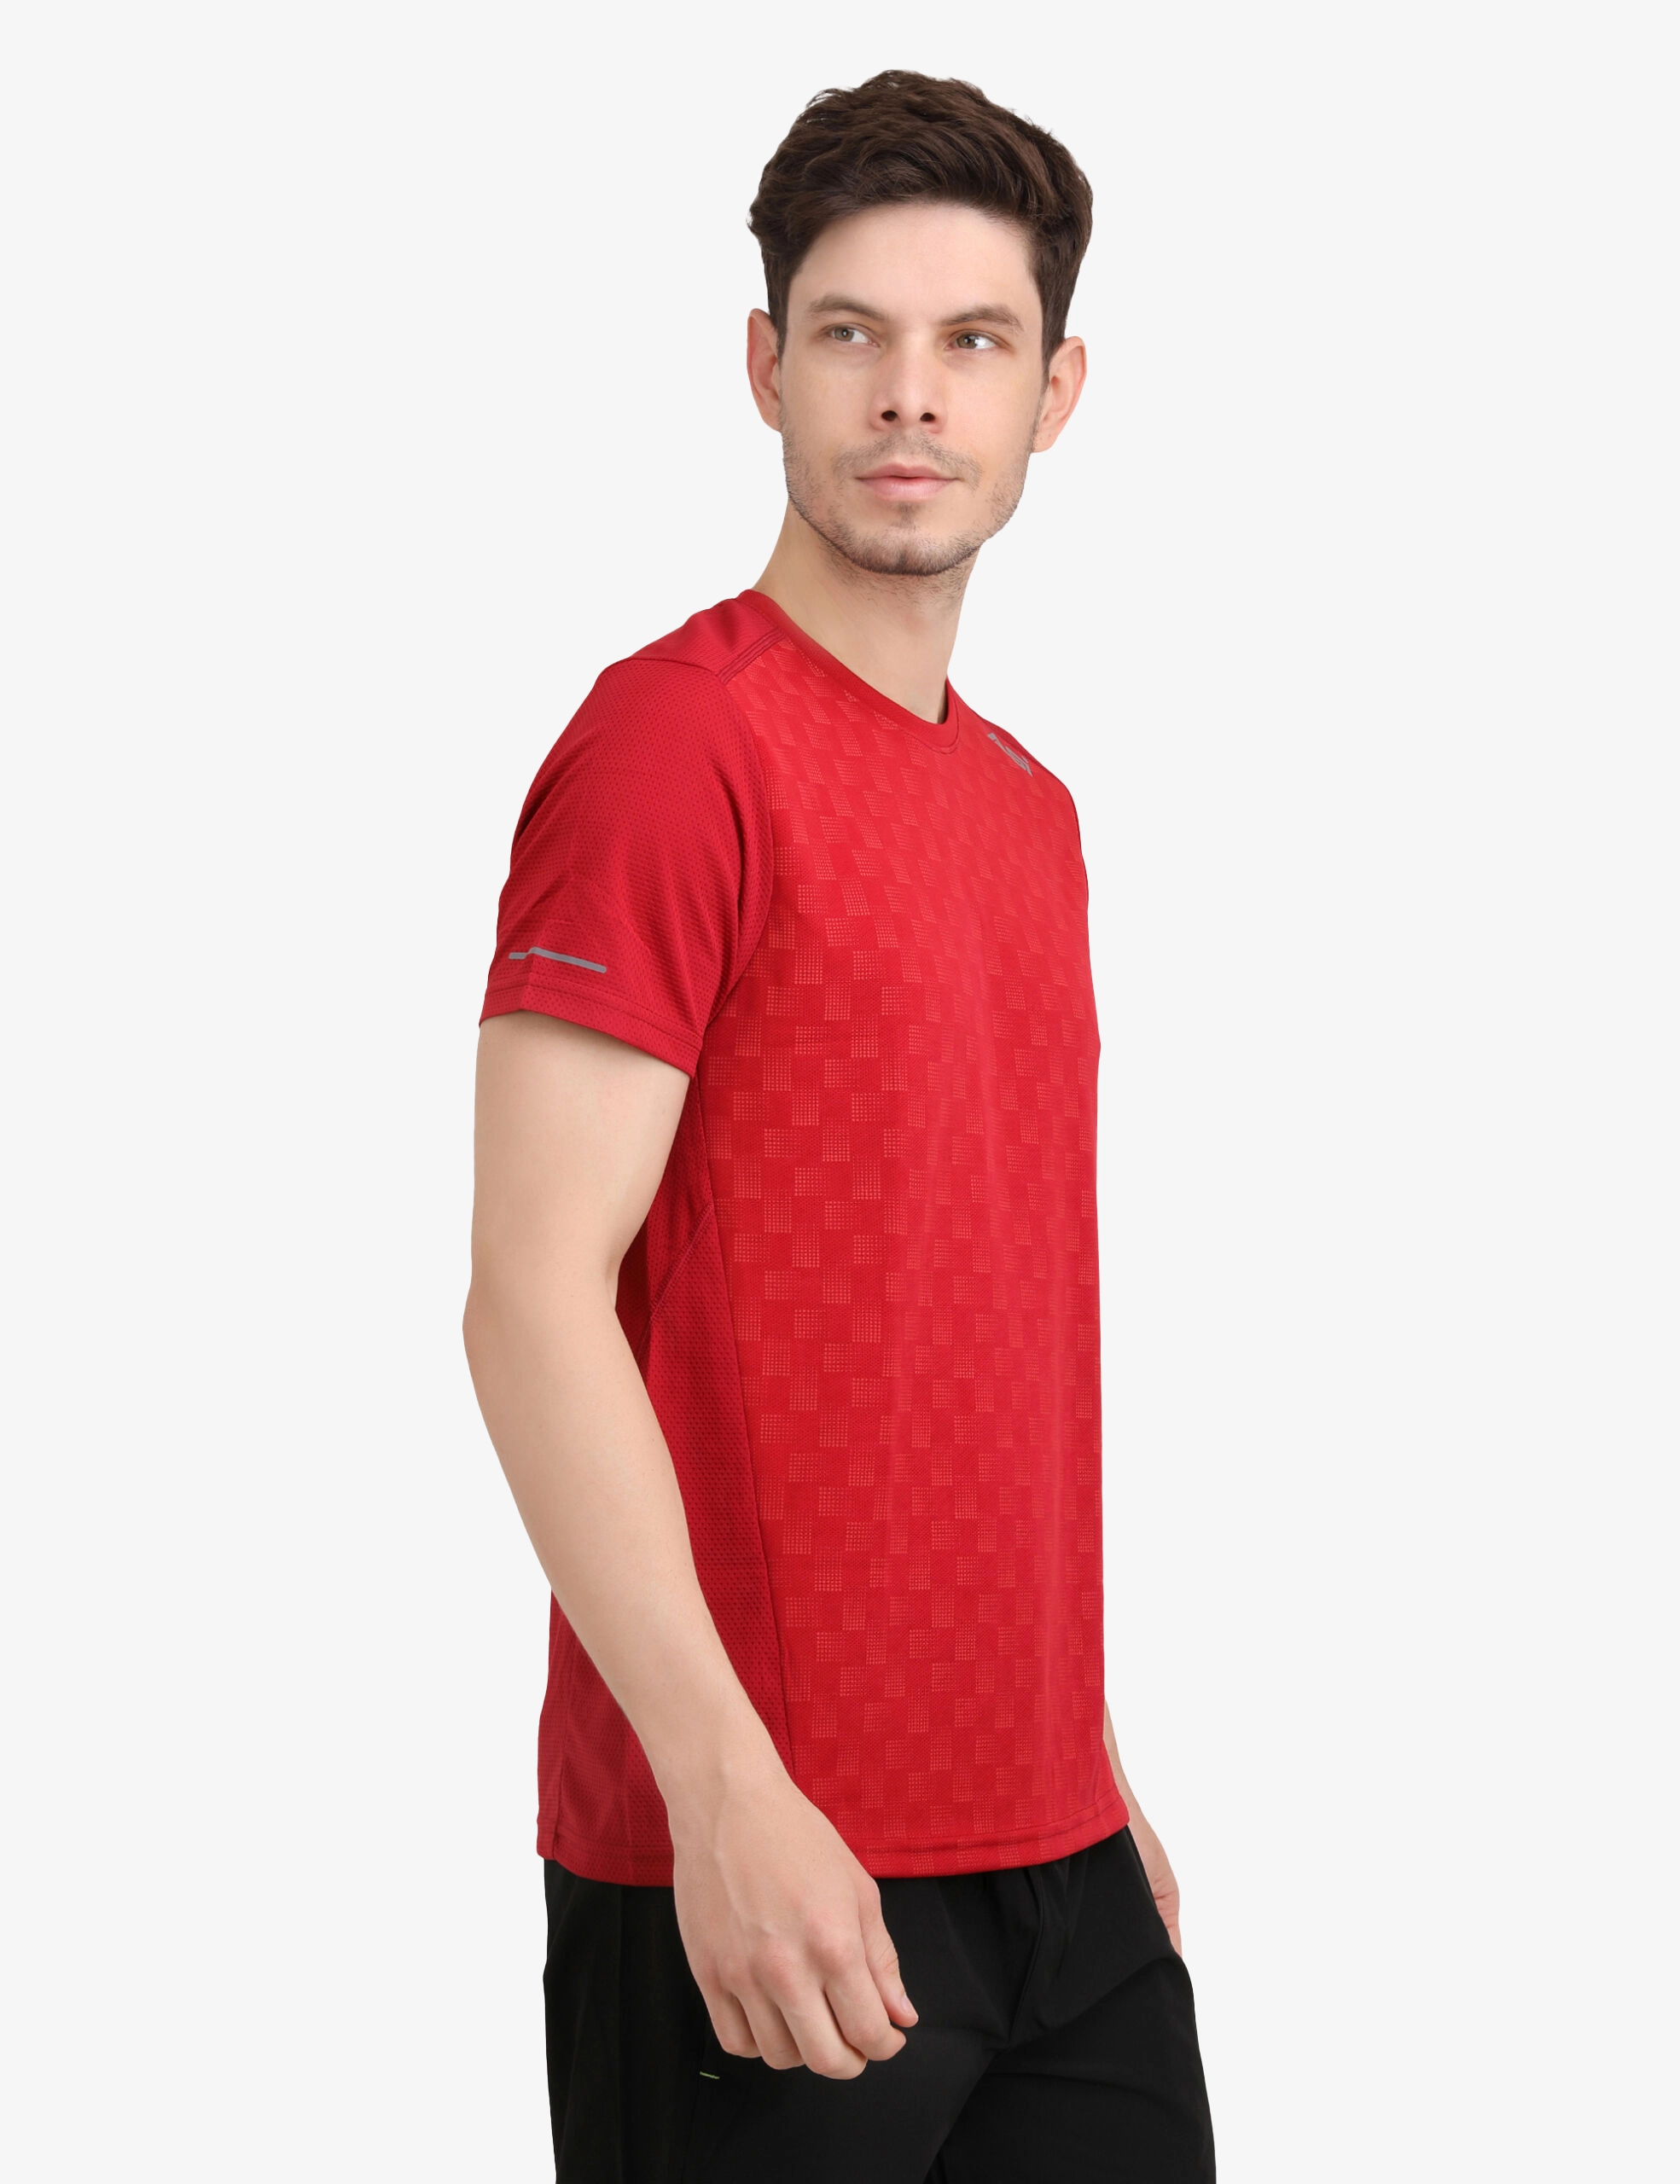 ASI Amaze Sports T-Shirt Red Color for Men